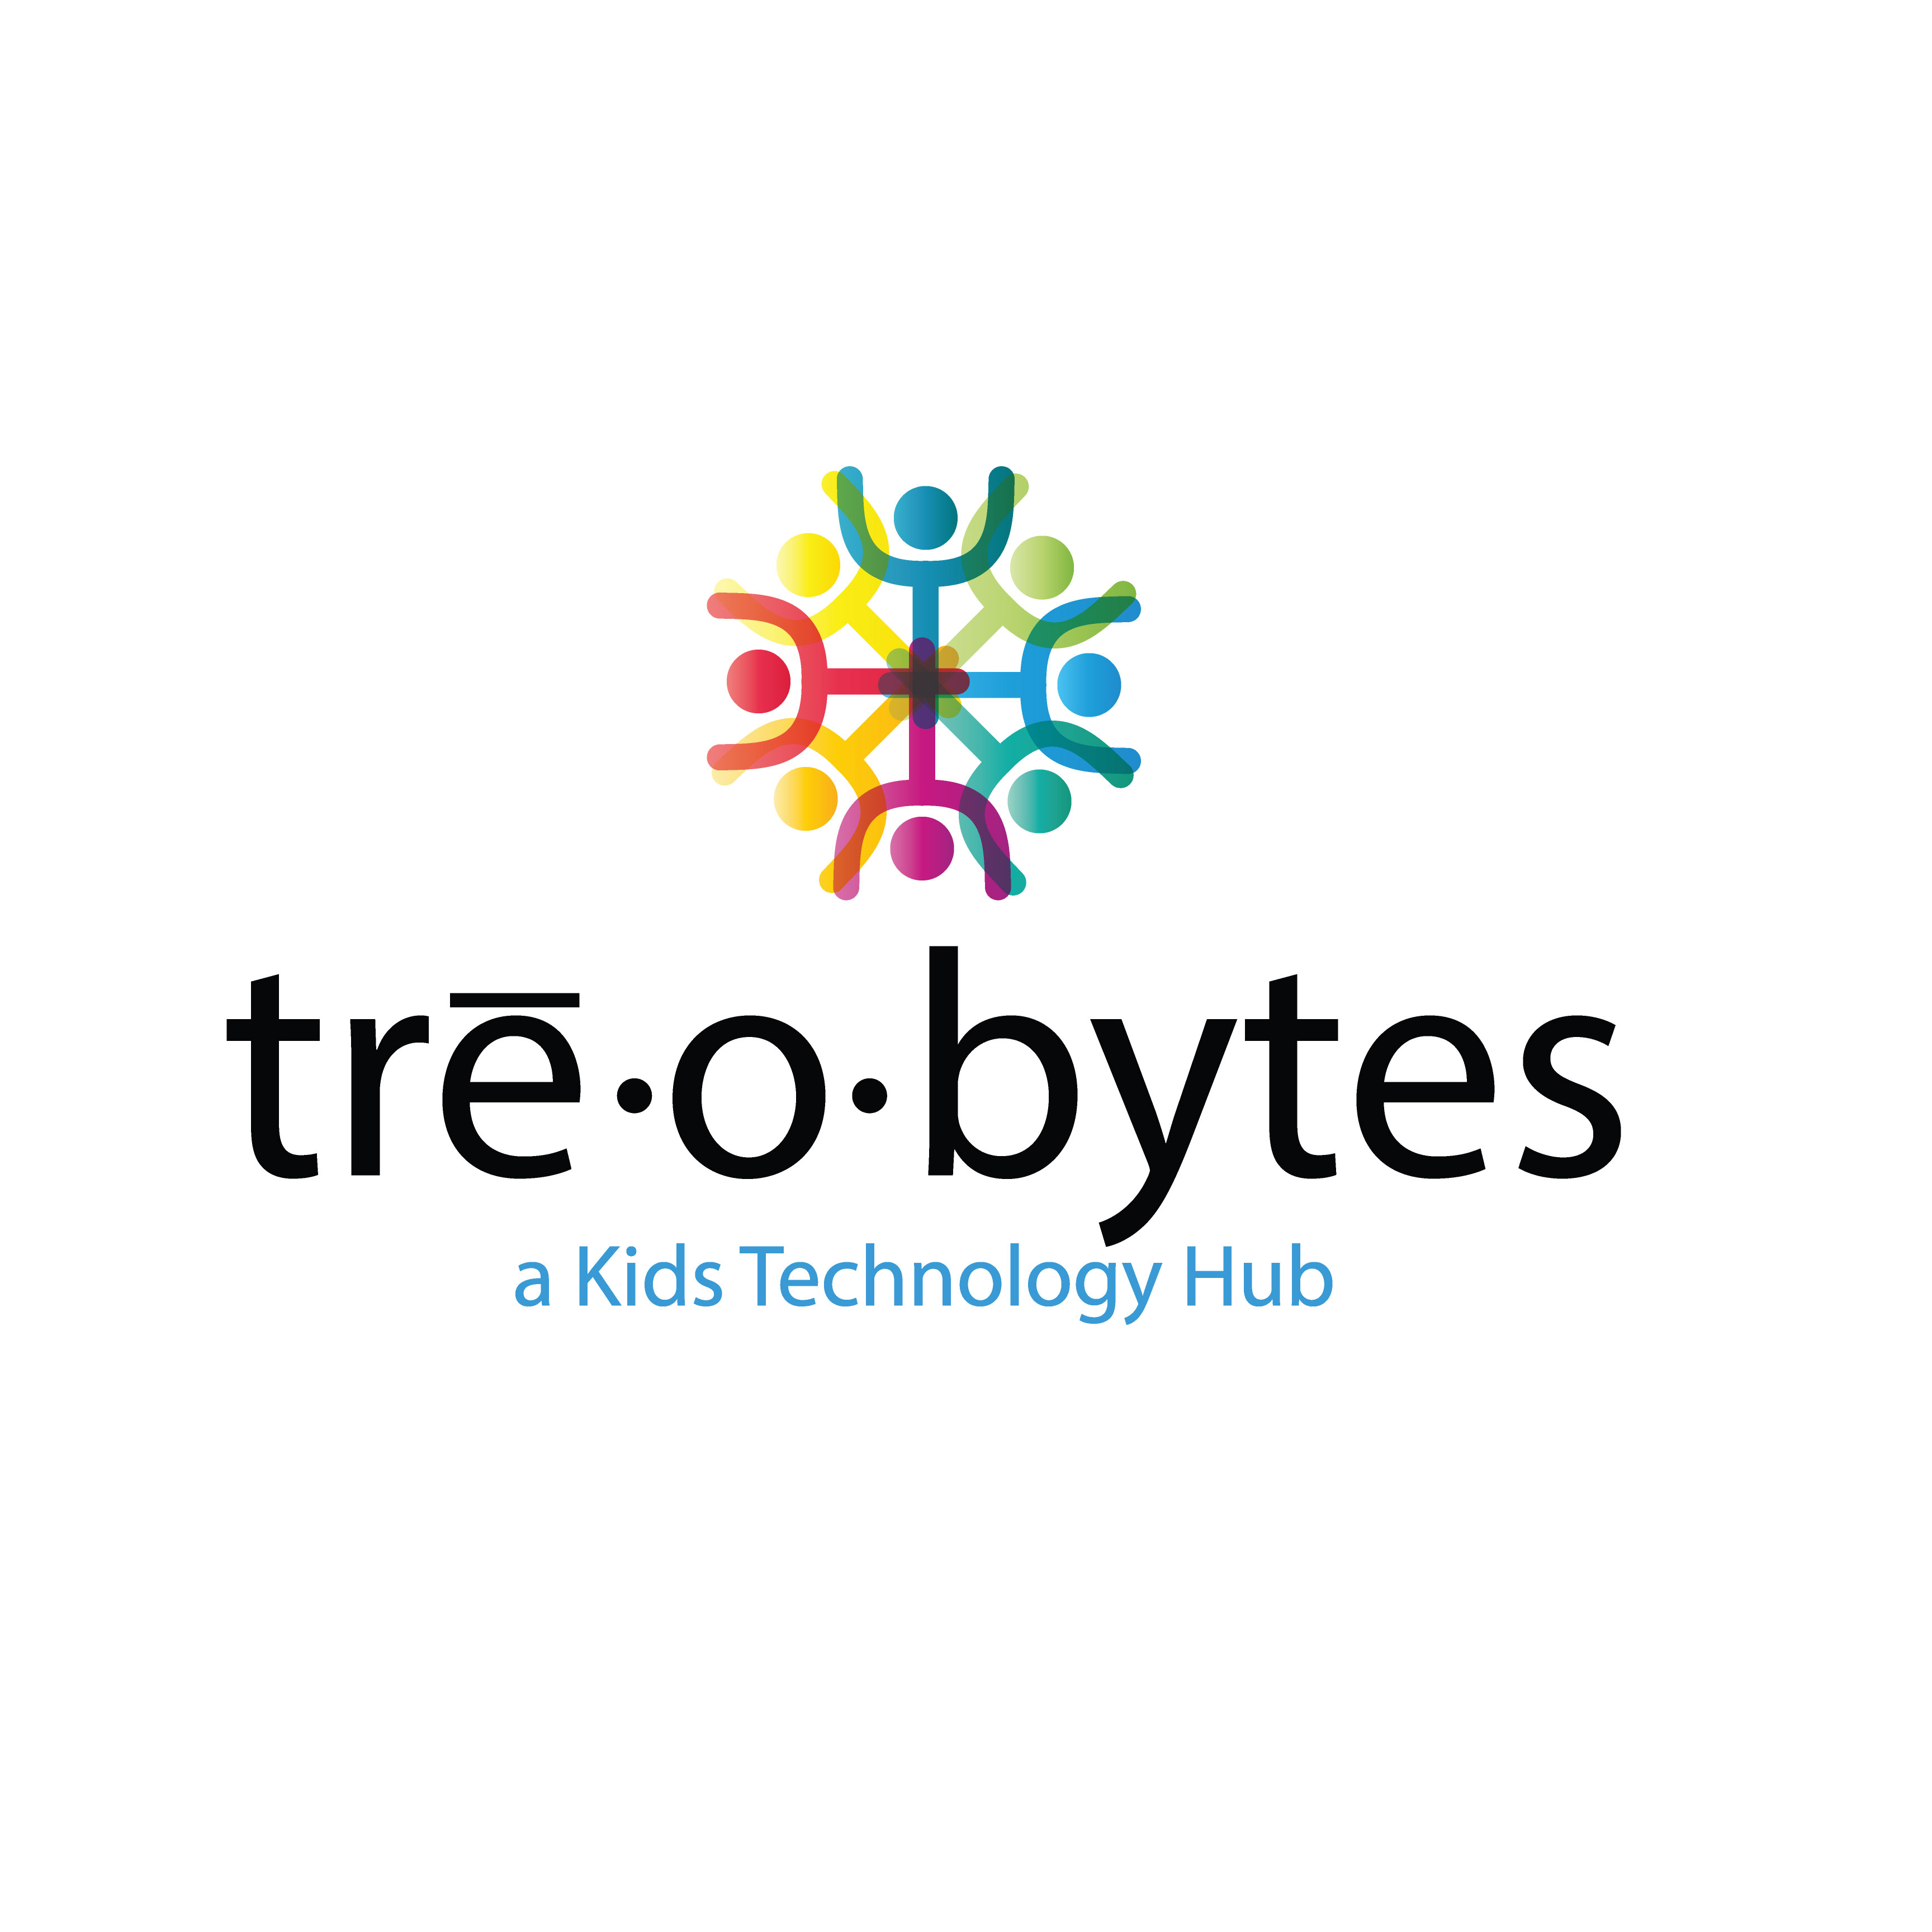 Treobytes is a 501(c)3 non-profit organization focused on closing the STEM gap and making technology accessible to kids, especially those in underprivileged areas.